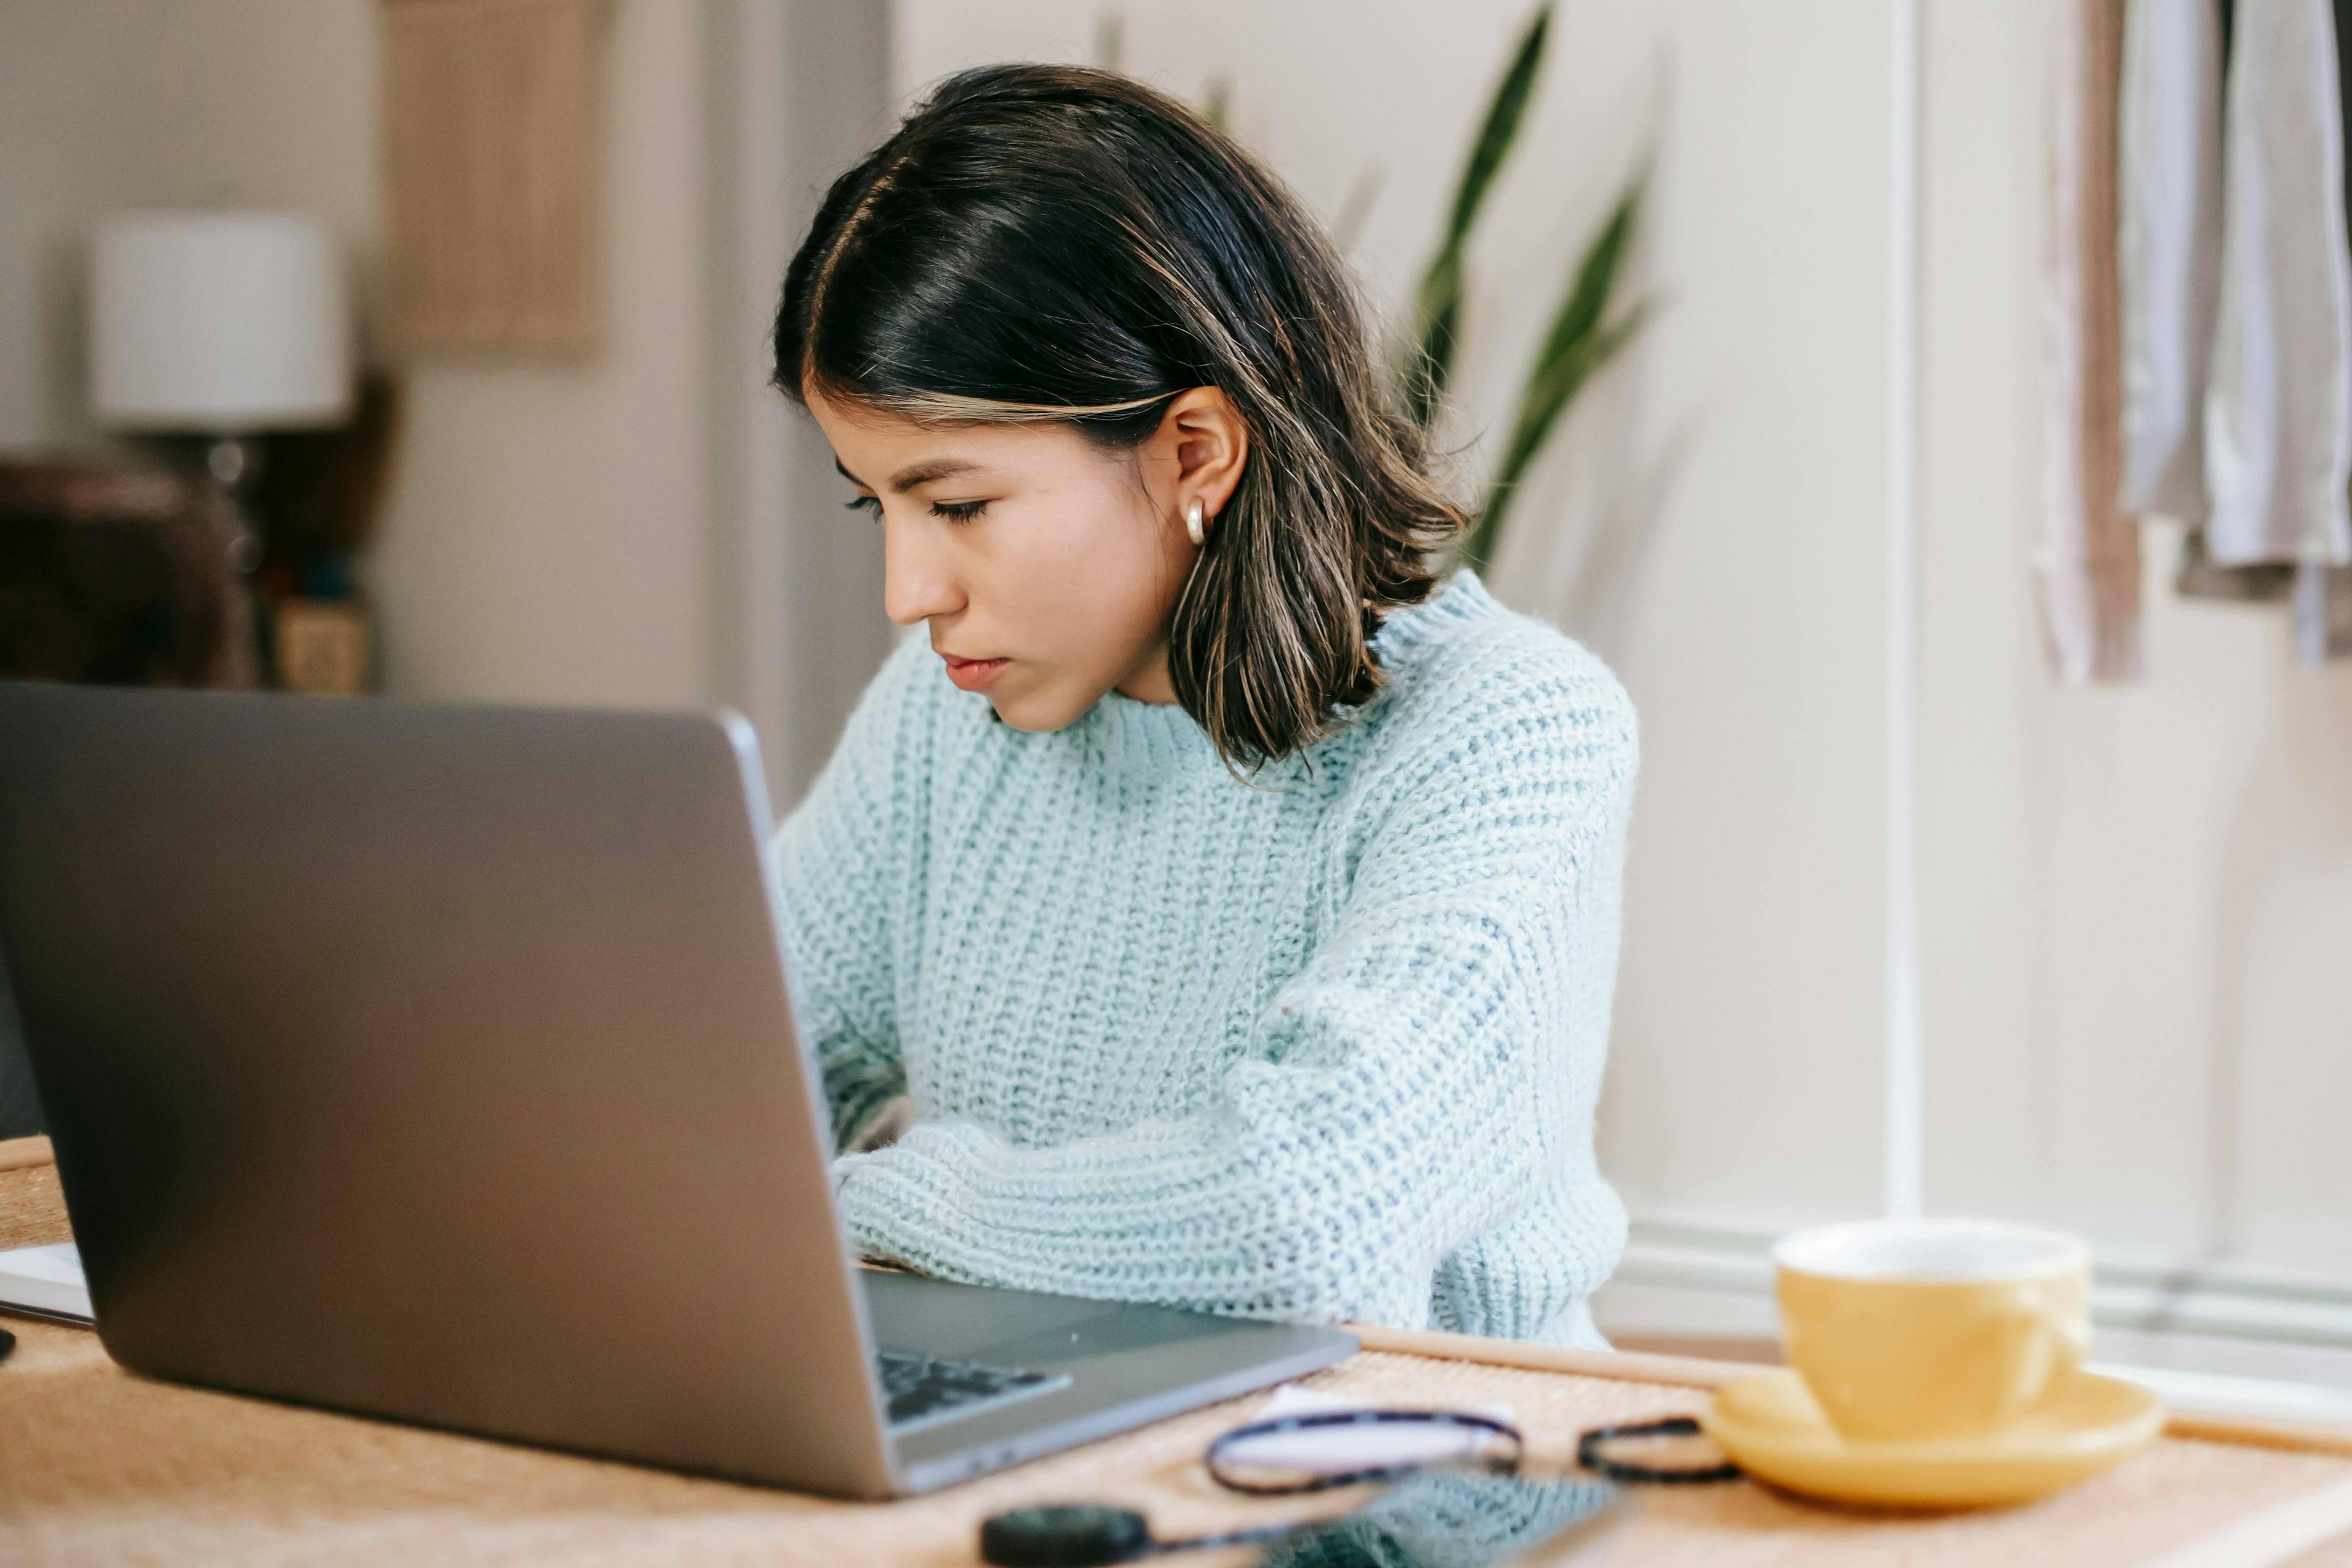 A young woman in a blue sweater, deeply focused on her laptop with a cup of coffee nearby, analyzing data related to market events this week.